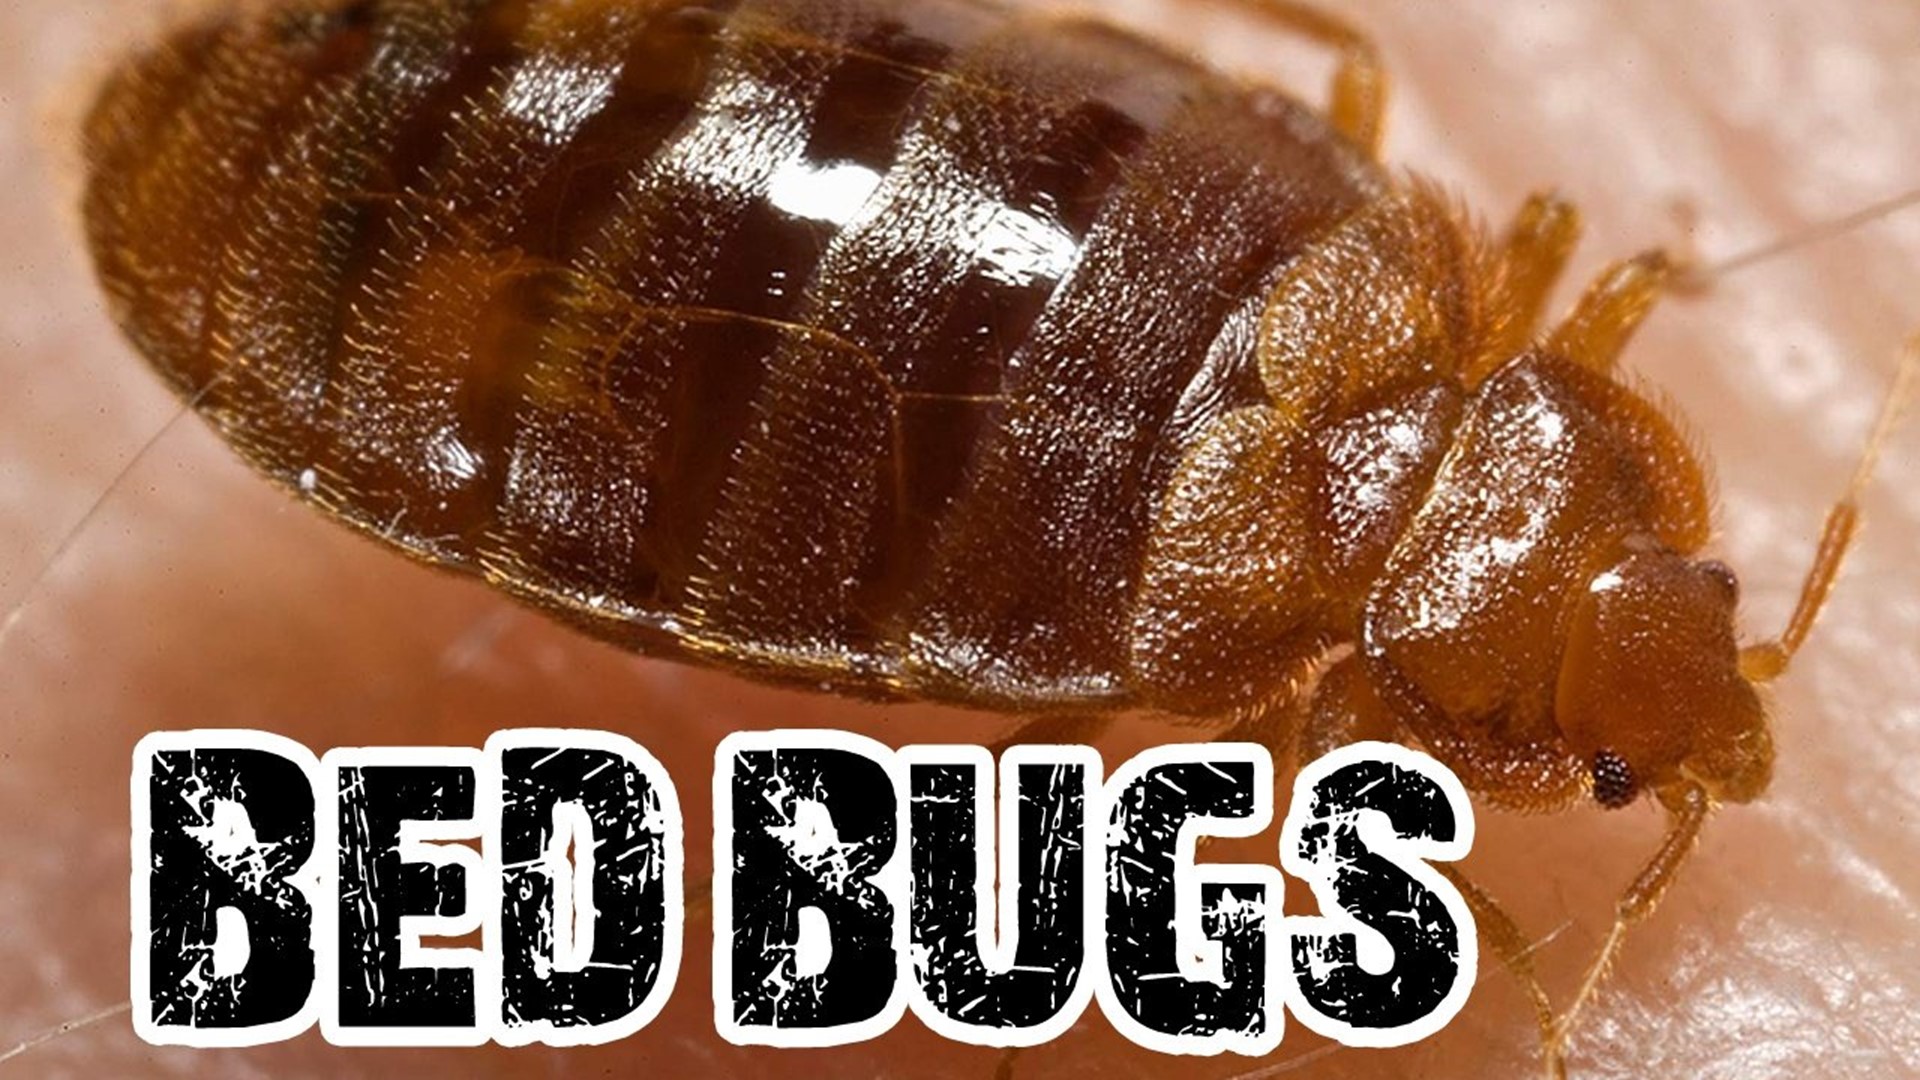 Woman Allows Thousands Of Bedbugs To Feed On Her Over 5 Years Makes